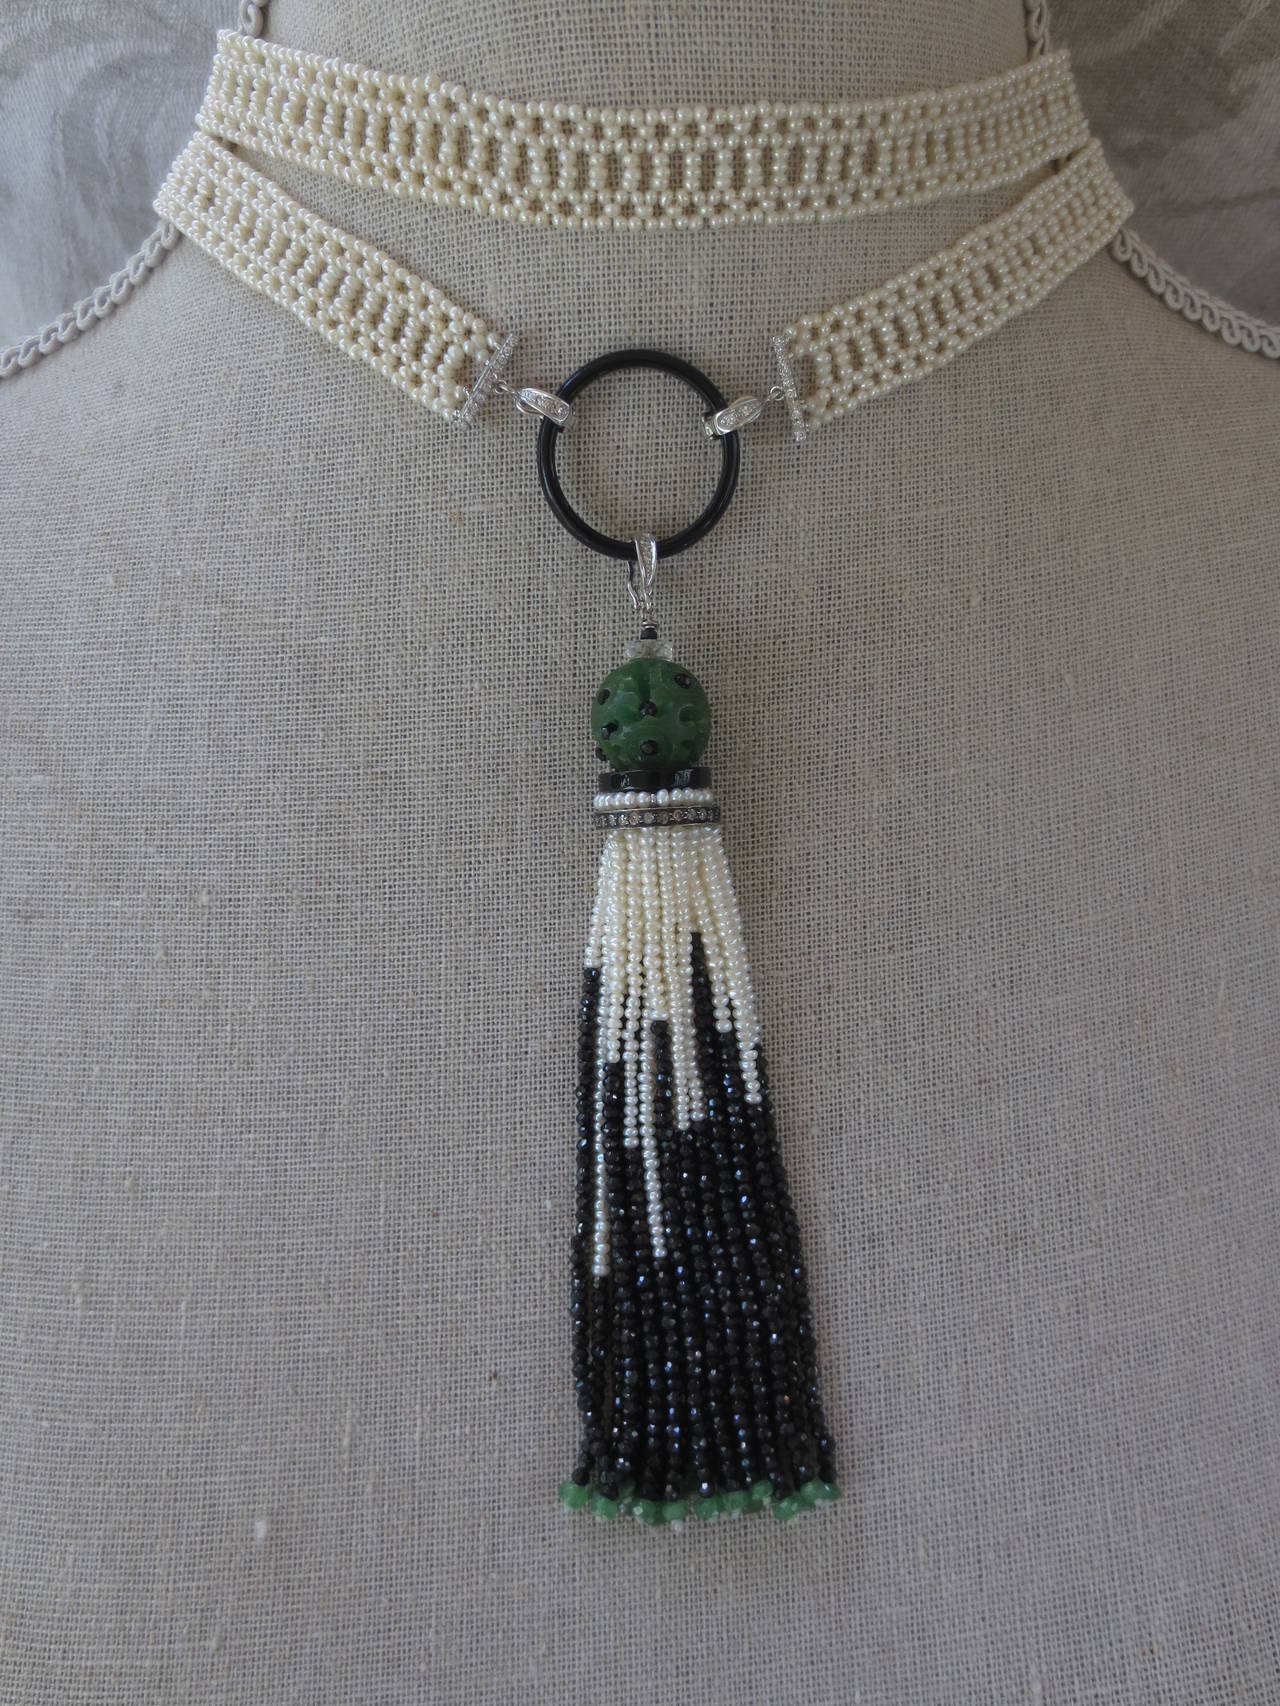 Women's Marina J. Woven Long Seed Pearl Sautoir Necklace with 14K Gold and Onyx Tassel